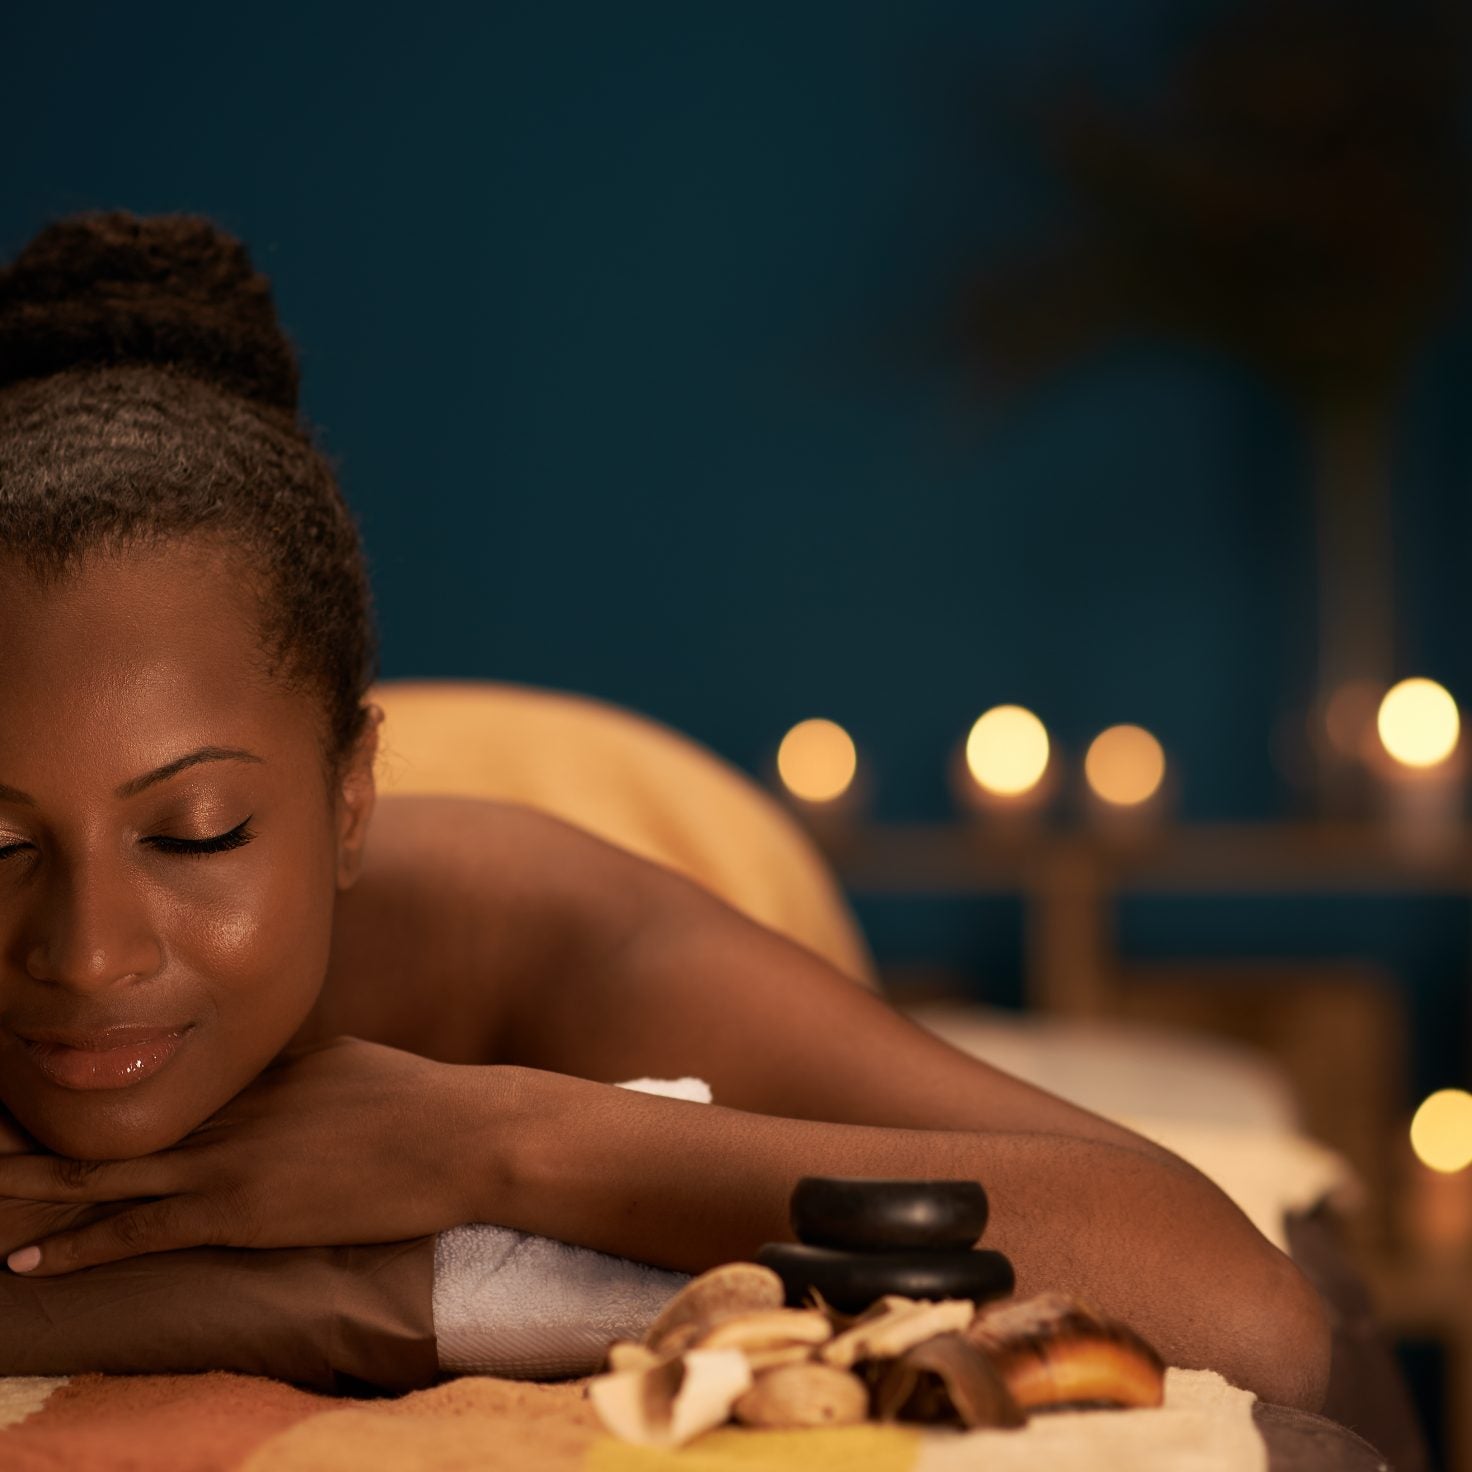 Destination Wellness! Check-in To Relaxation At These Luxurious Hotel Spas